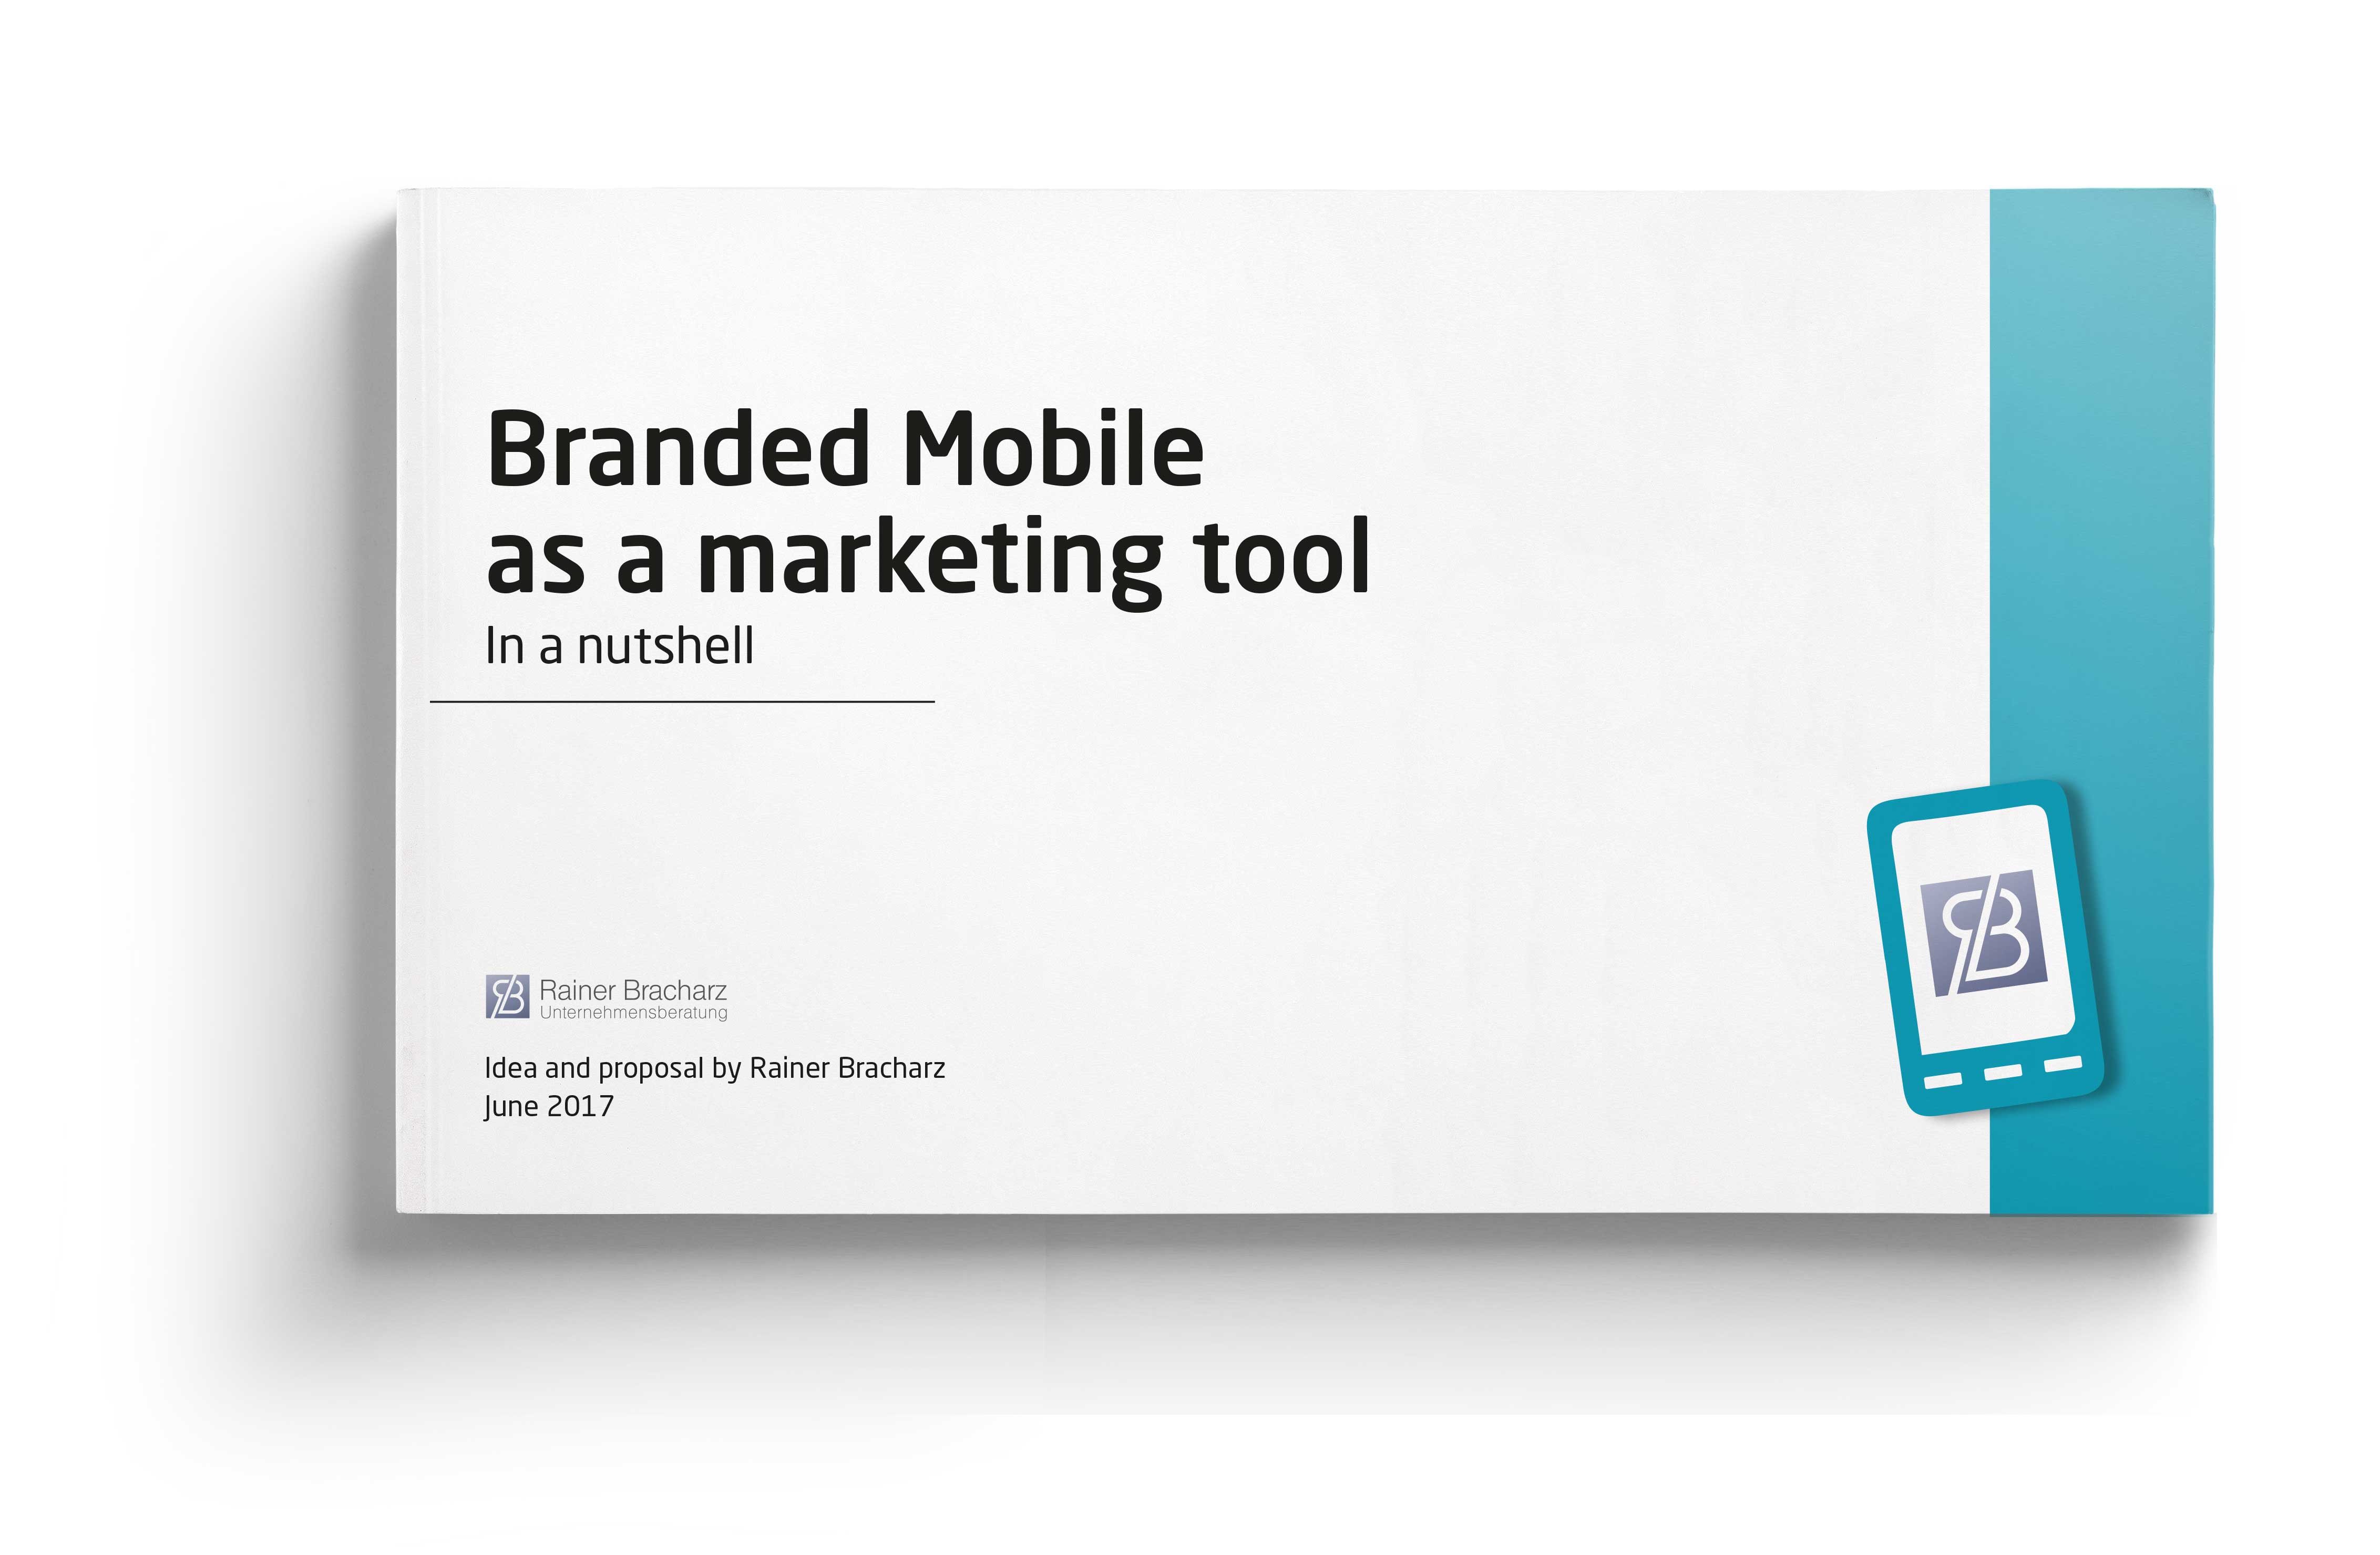 Branded Mobile as a marketing tool